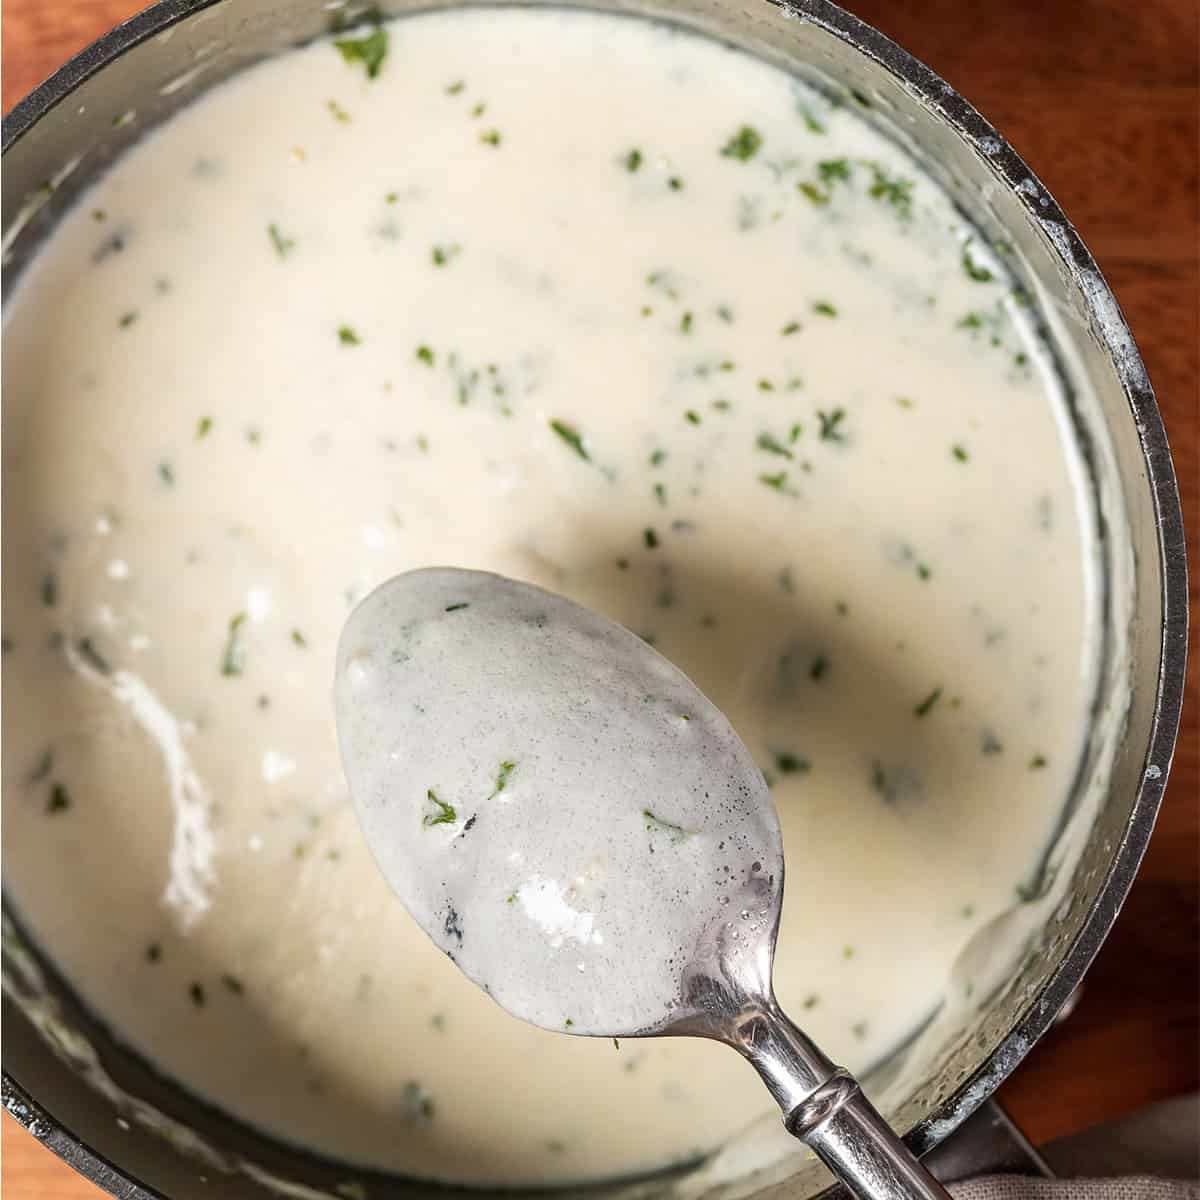 Garlic cream sauce in a bowl with a spoon